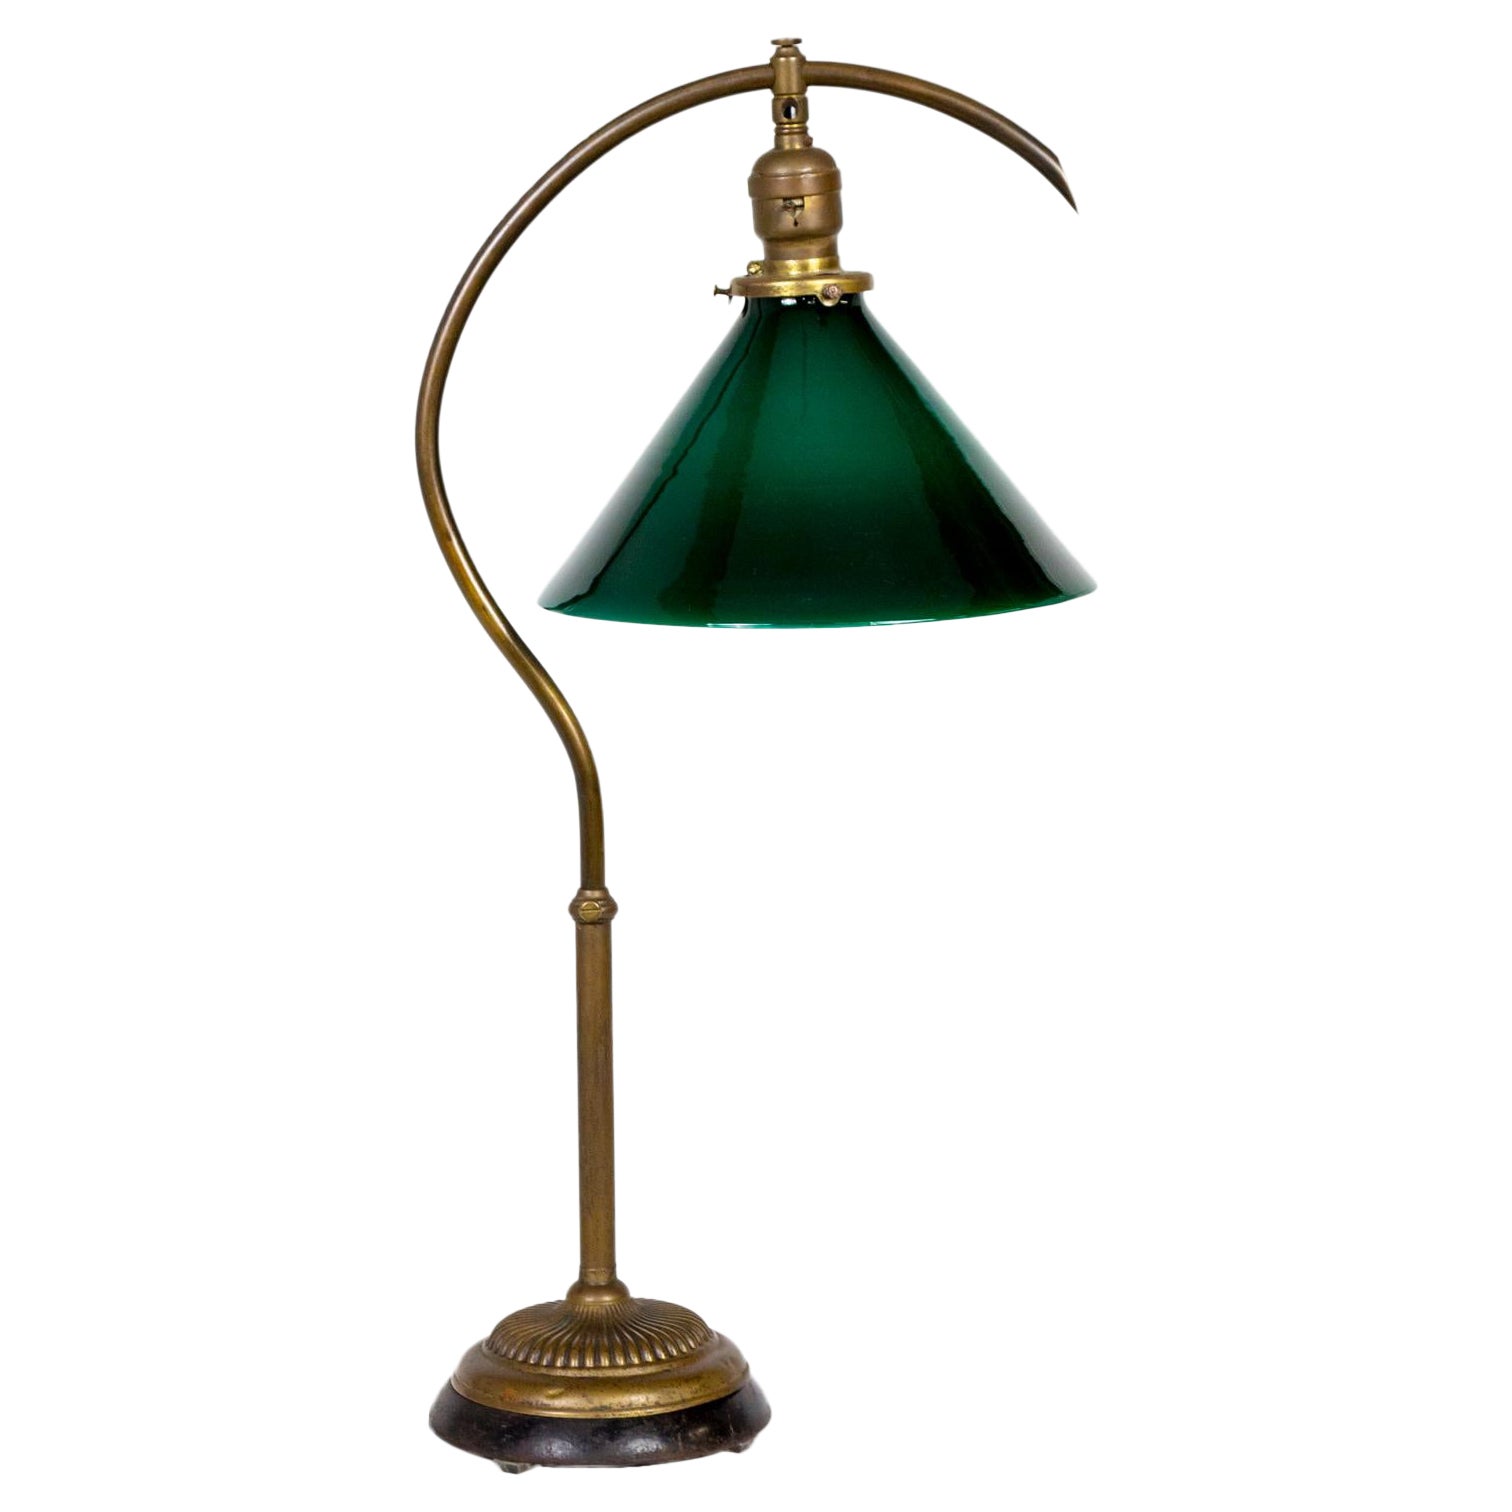 Early 20th C. Emeralite Goose Neck Office Lamp